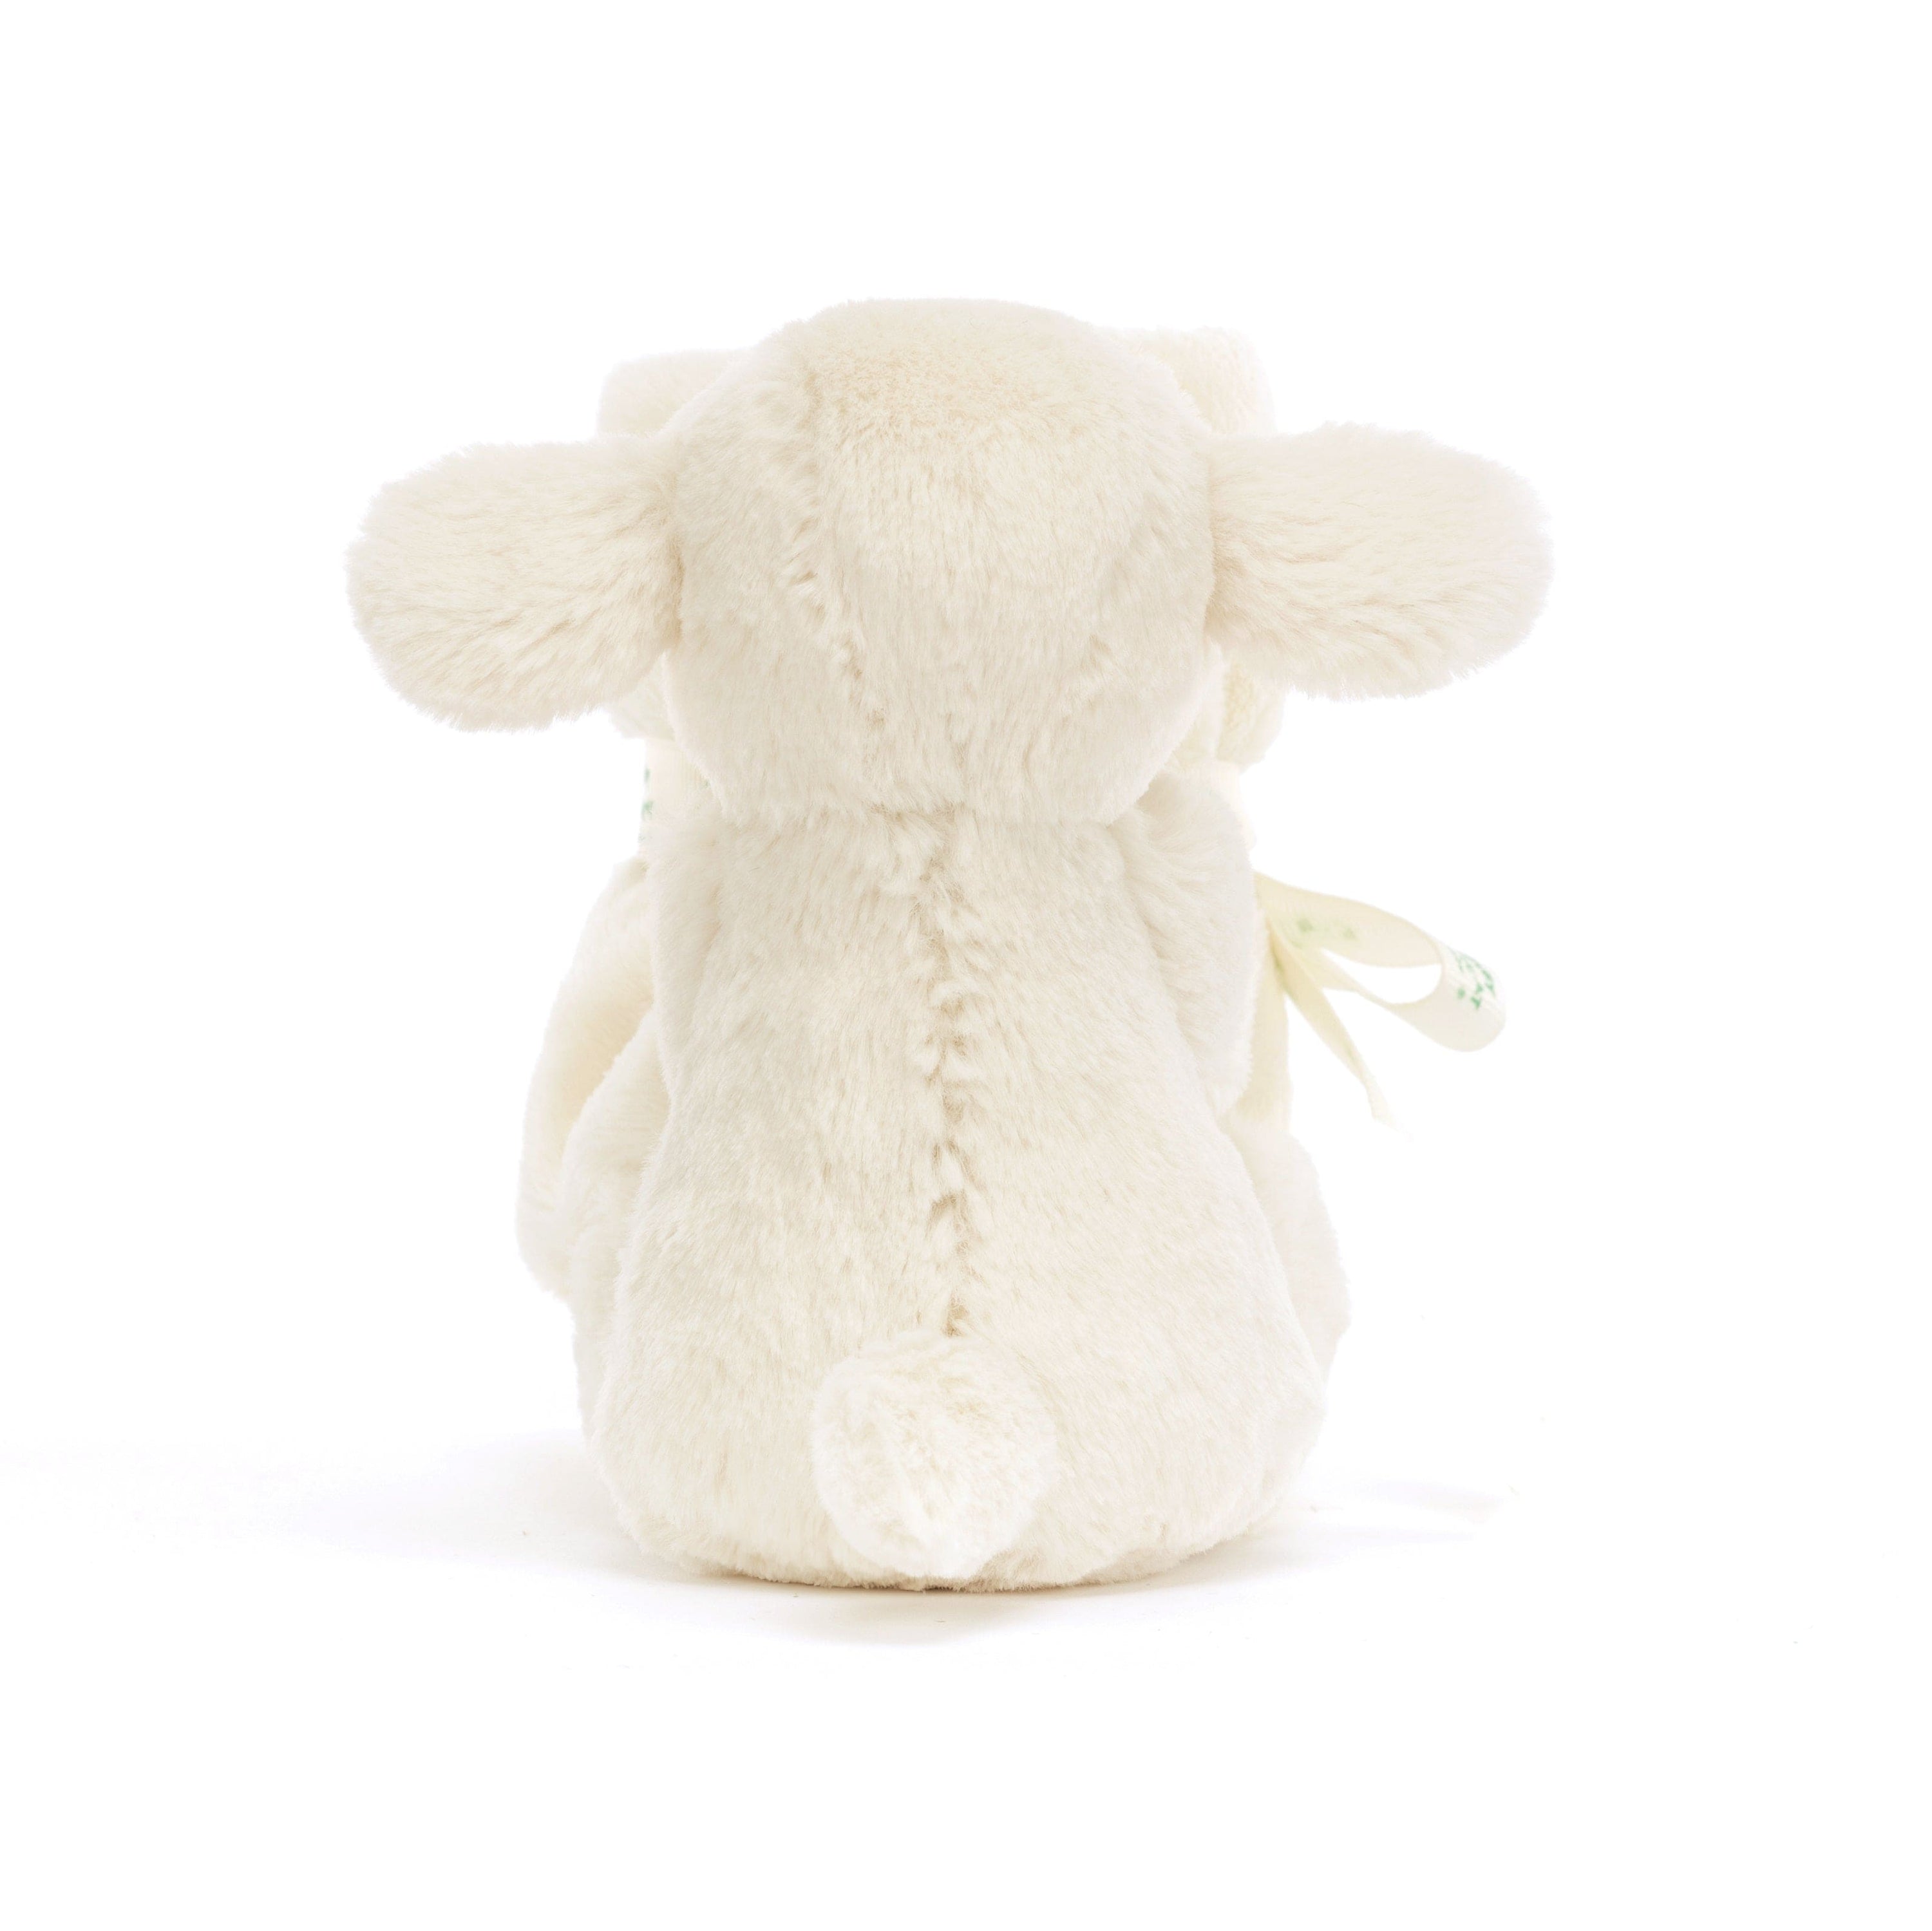 Bashful Lamb Soother JellyCat JellyCat Lil Tulips